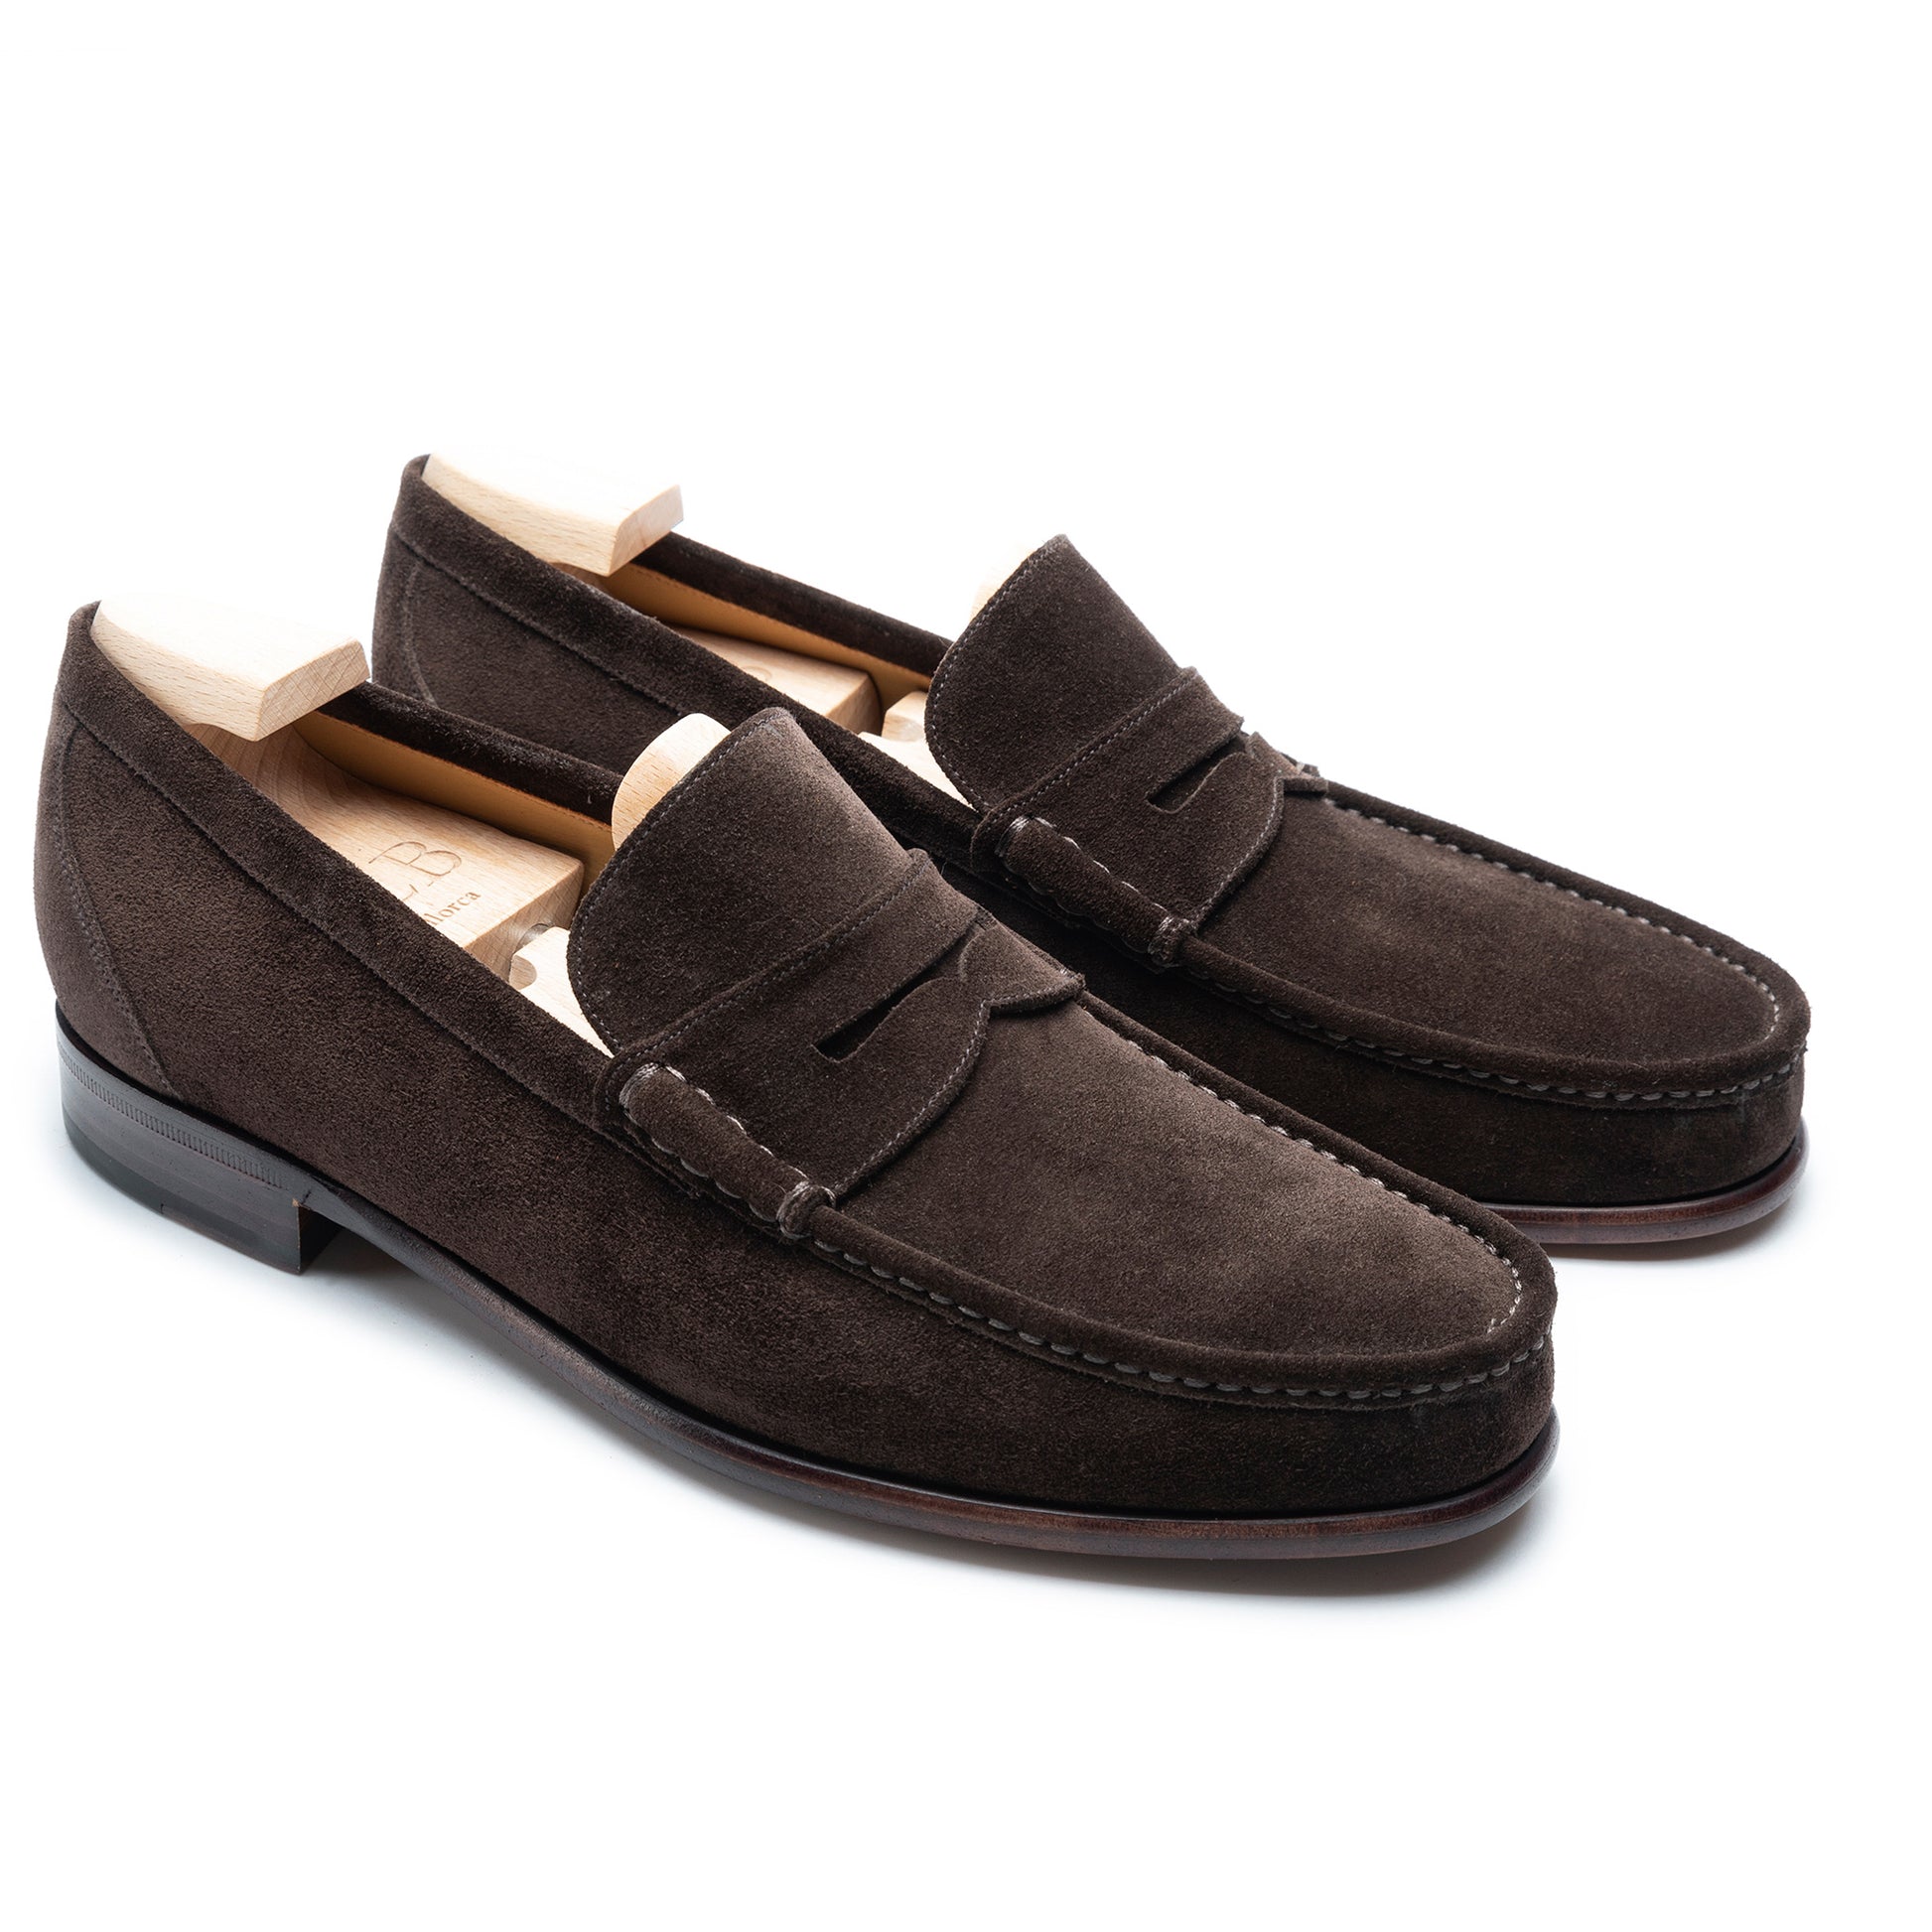 TLB Mallorca Oxford loafers, Men's Oxford shoes